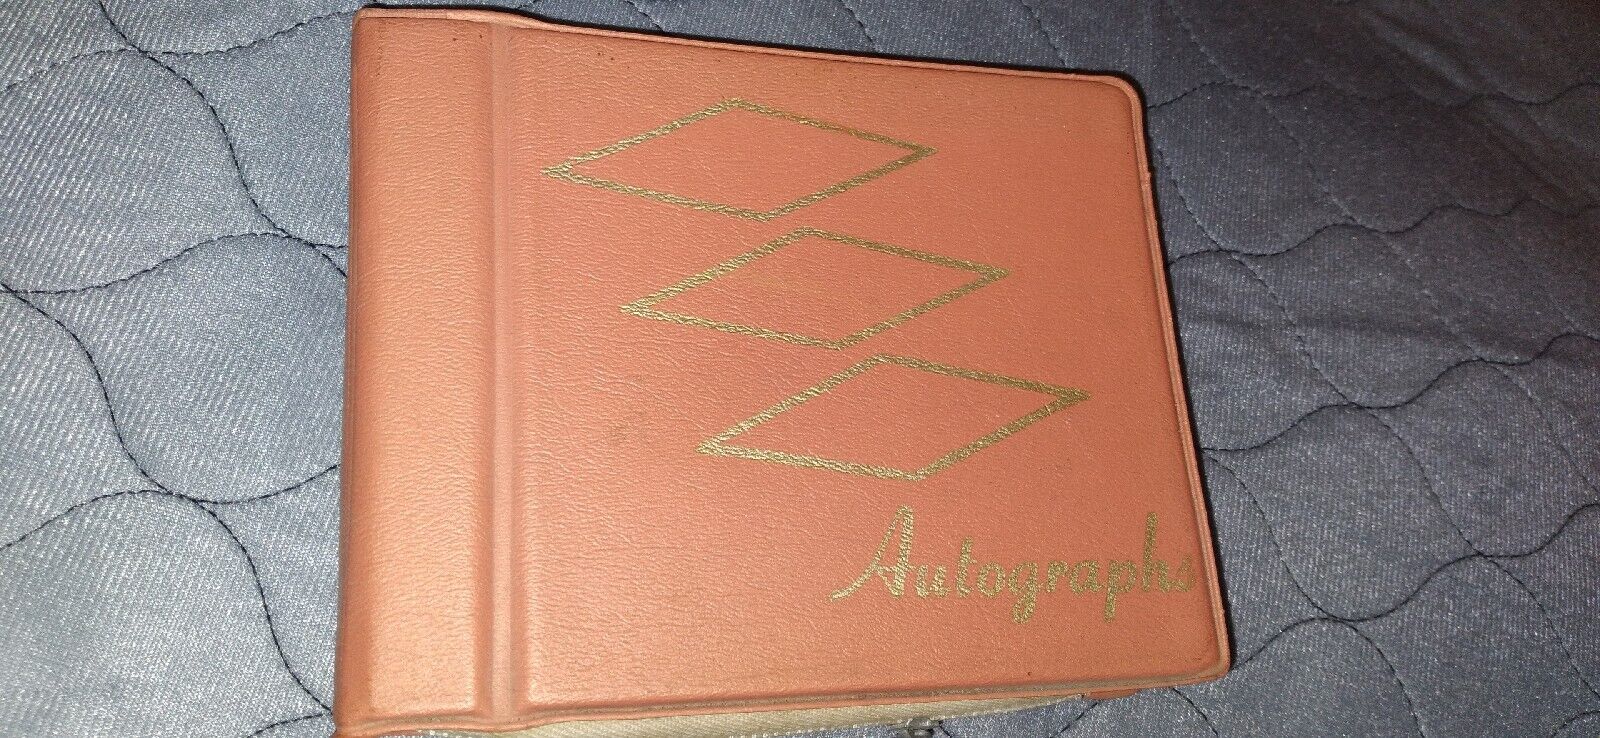 Vintage 1950s - 1960s Autograph Book with Signatures Throughout Book High School